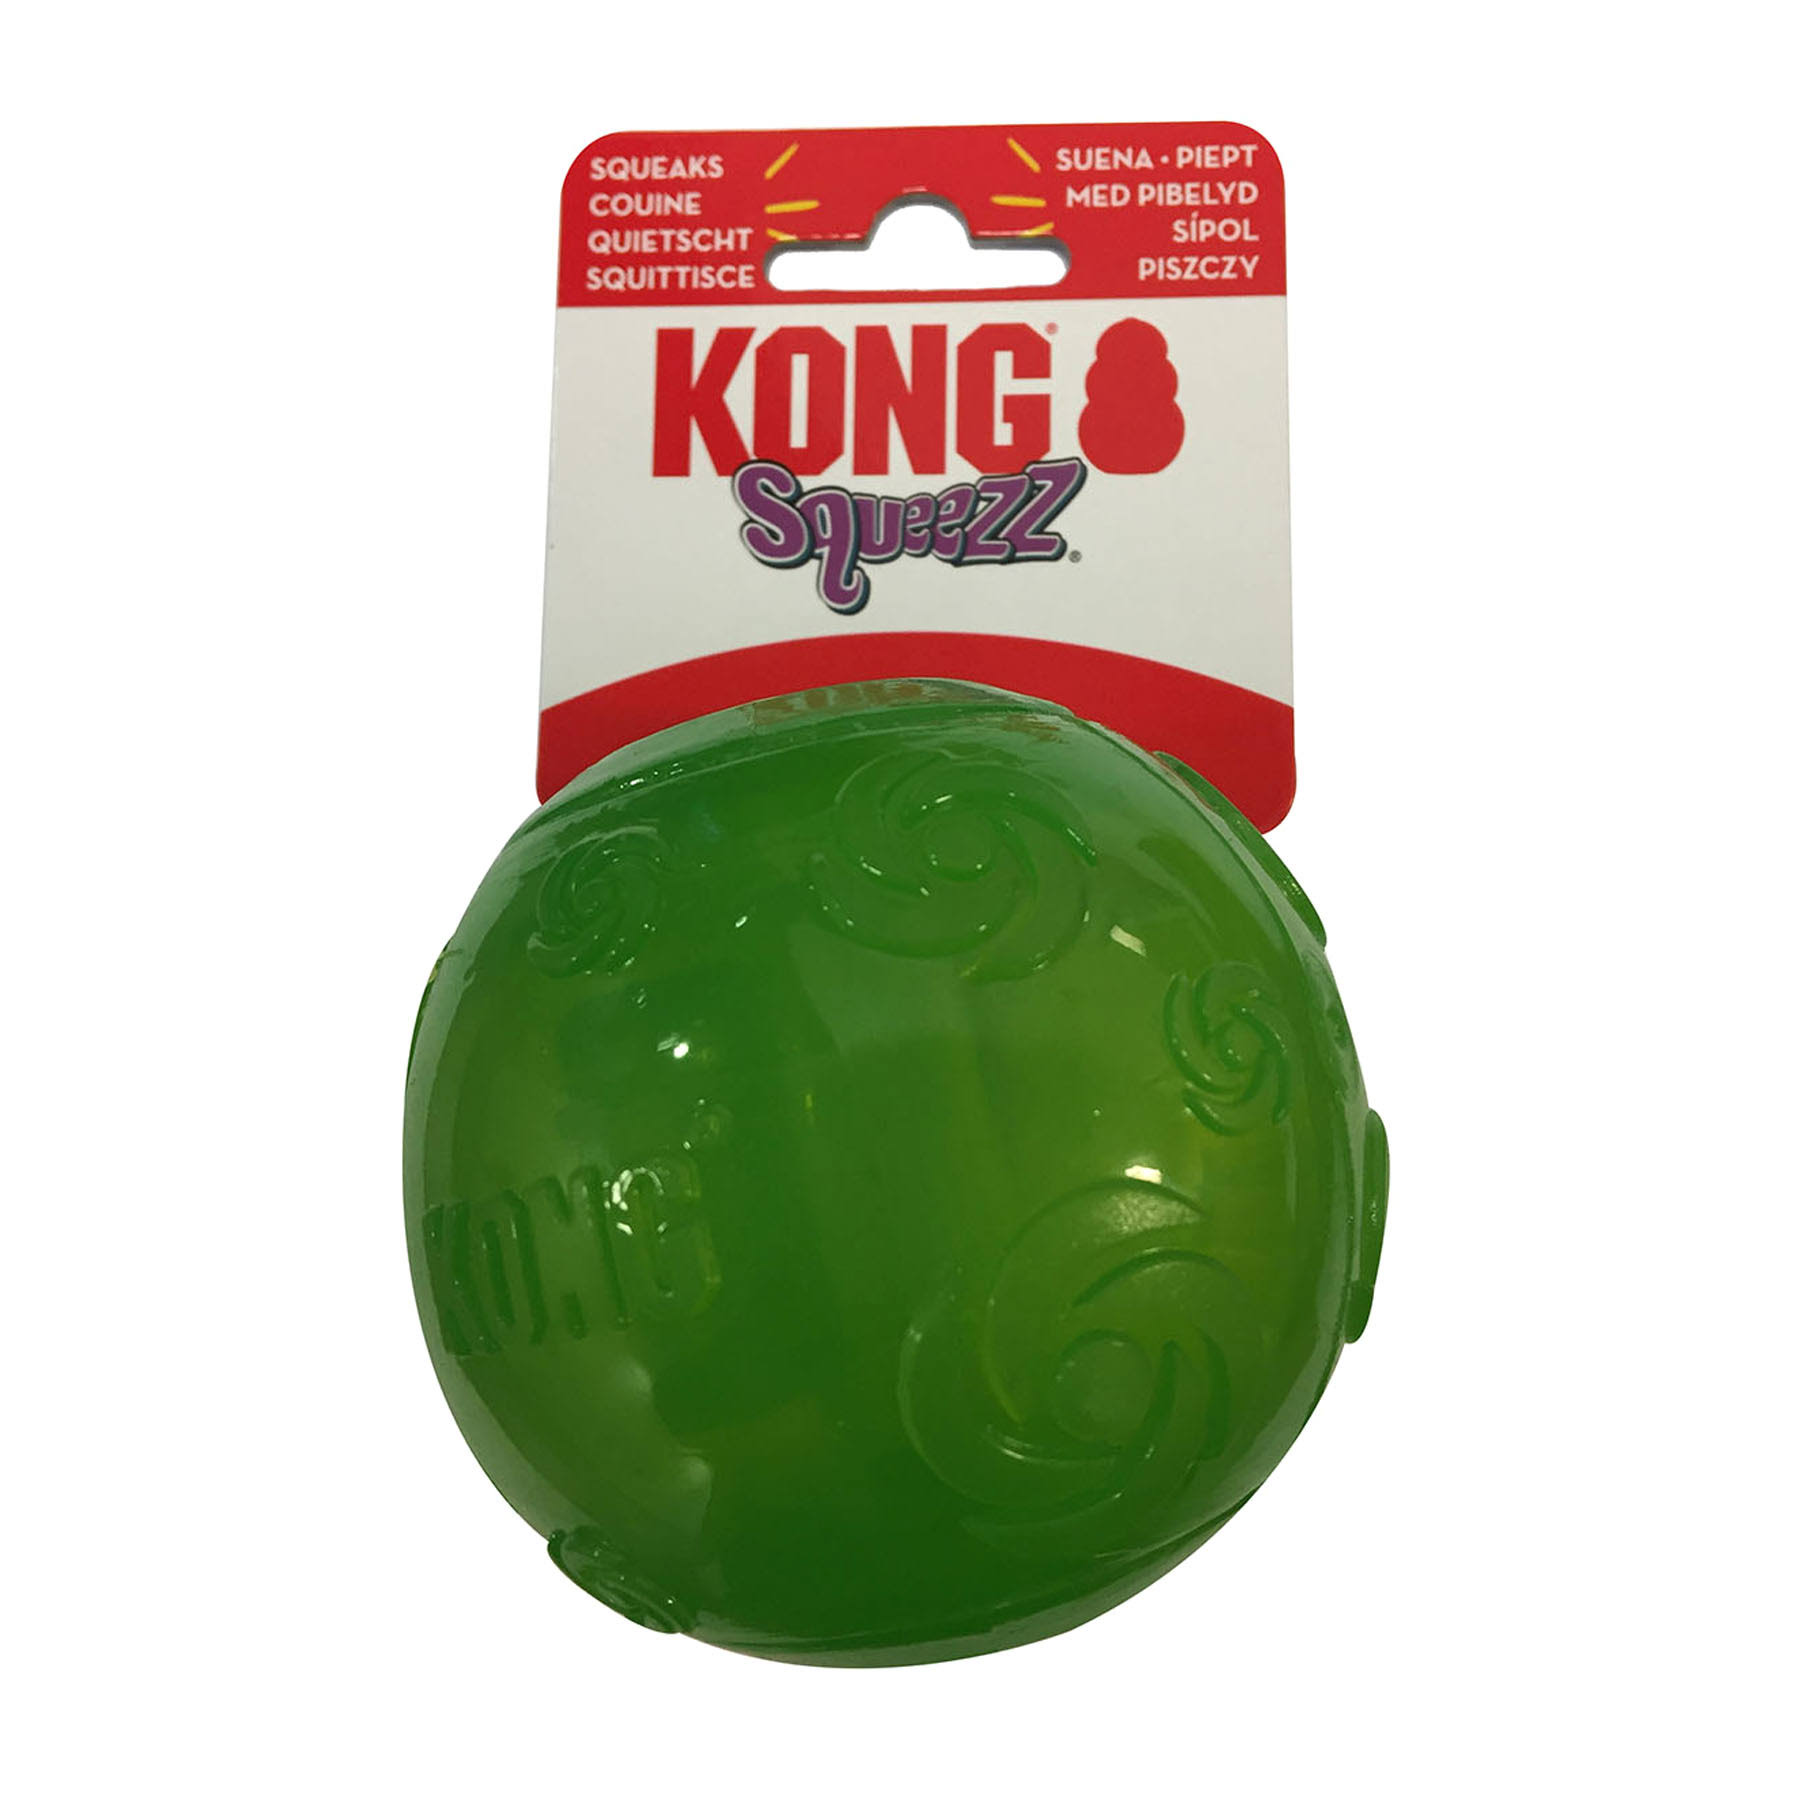 Kong Squeezz Rubber Ball Dog Toy